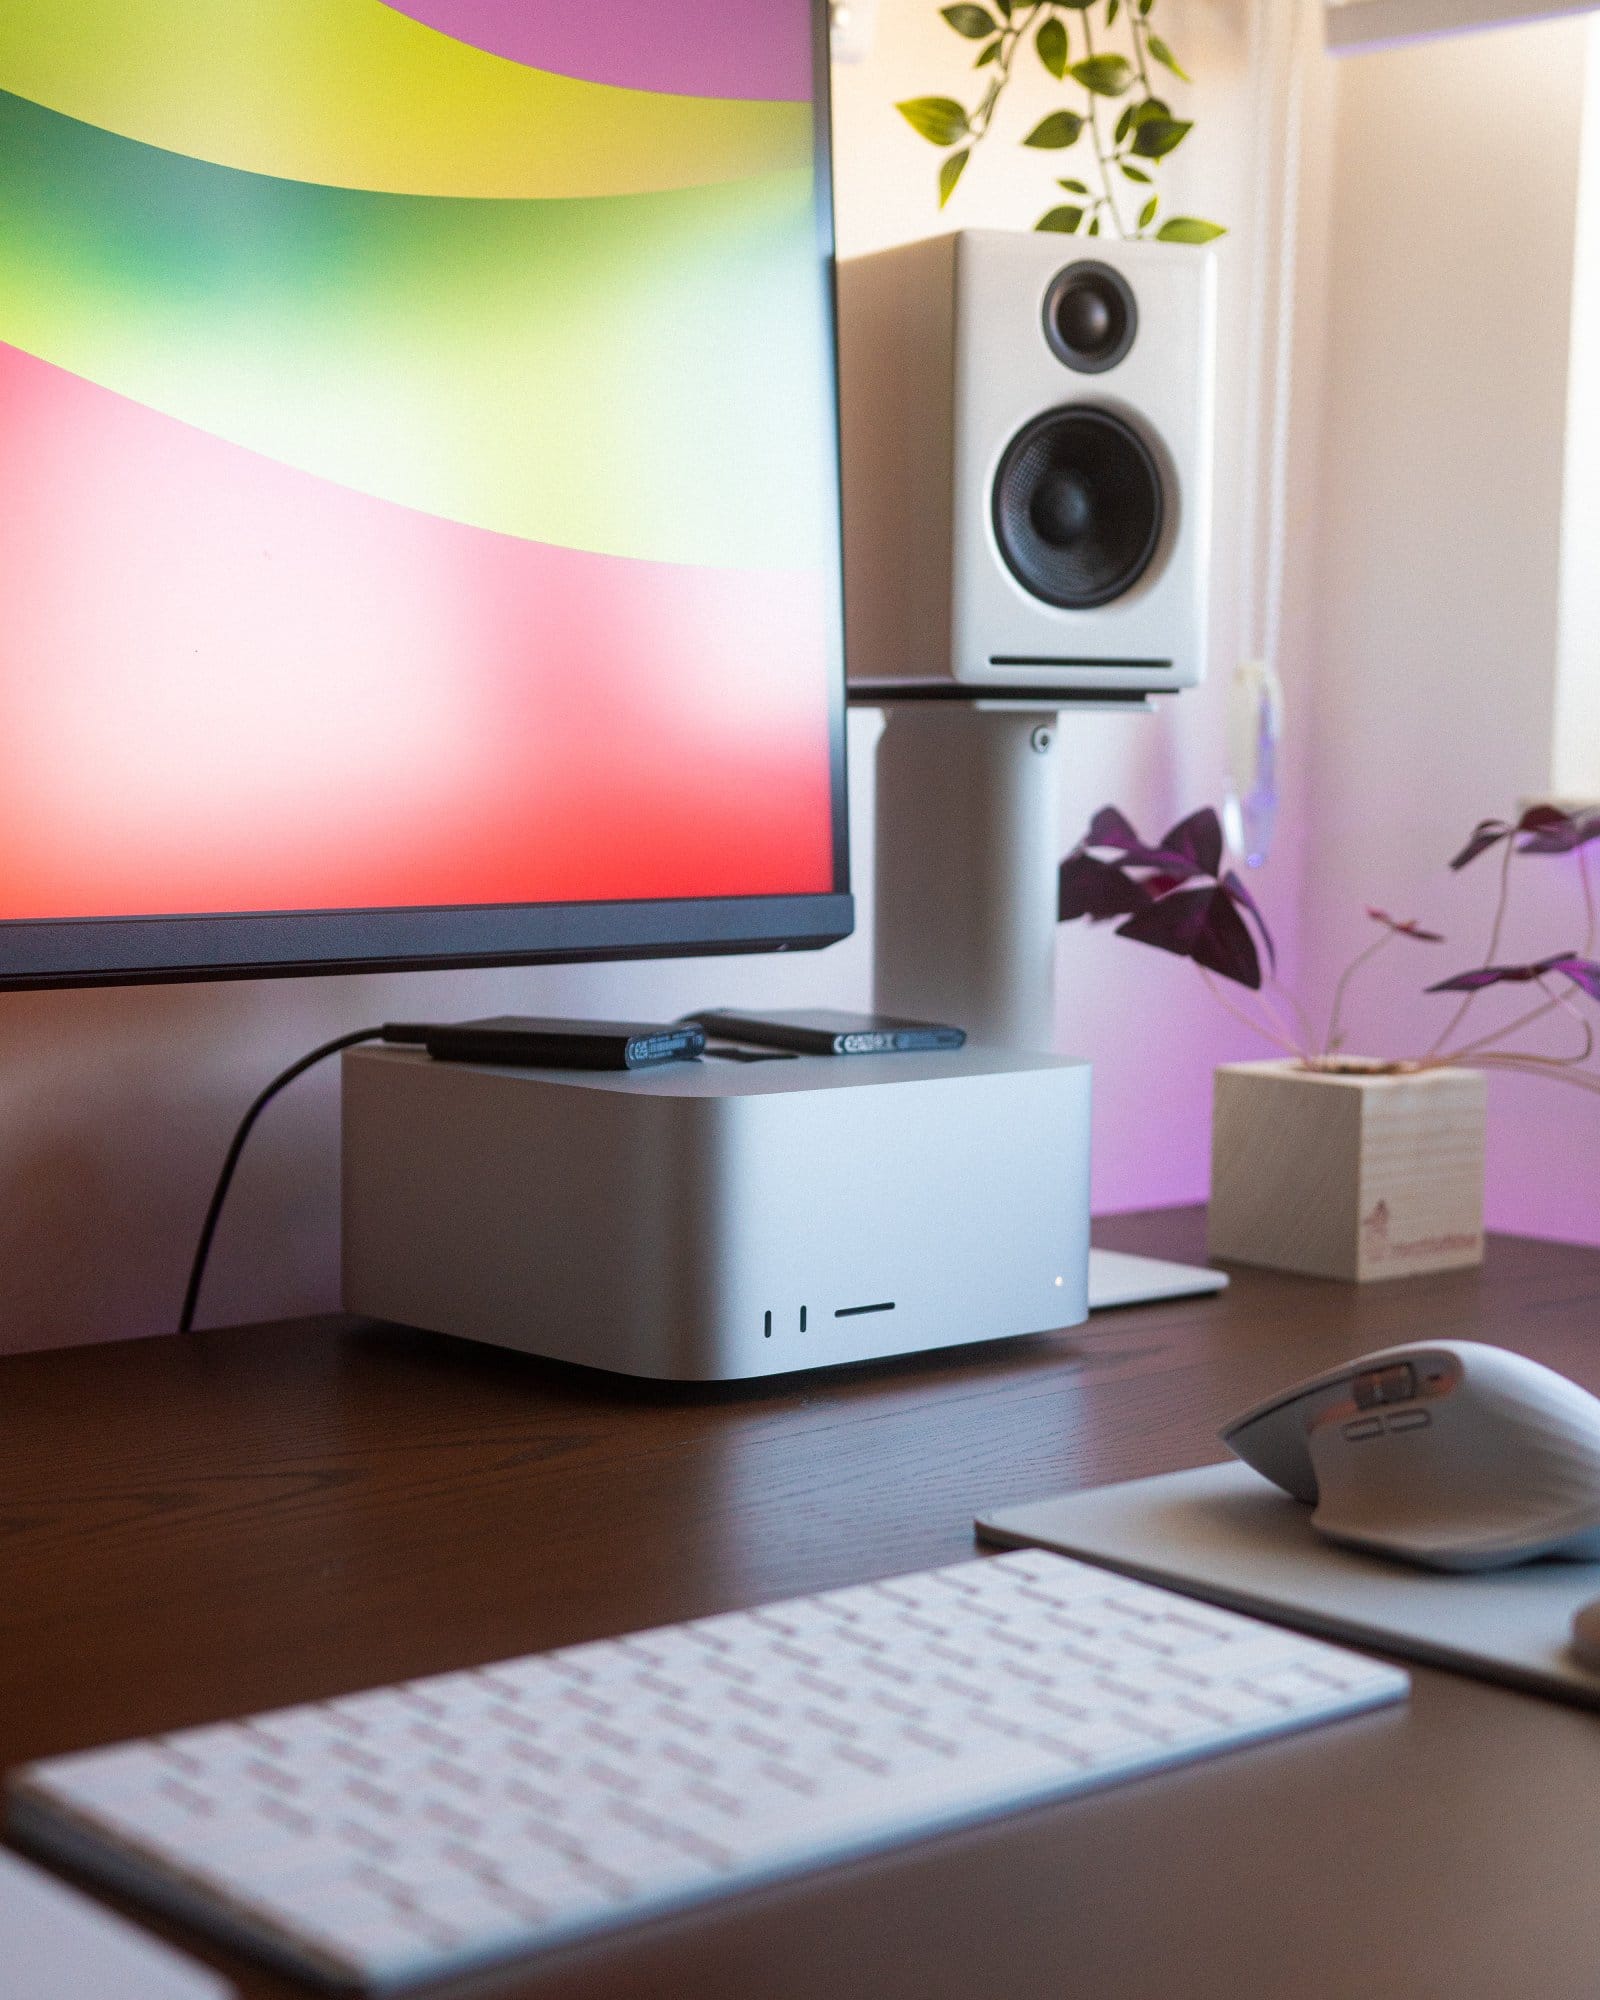 A close-up of a workspace with a Mac Studio M1 Max, keyboard, mouse, speaker, and part of a monitor, complemented by soft backlighting and houseplants